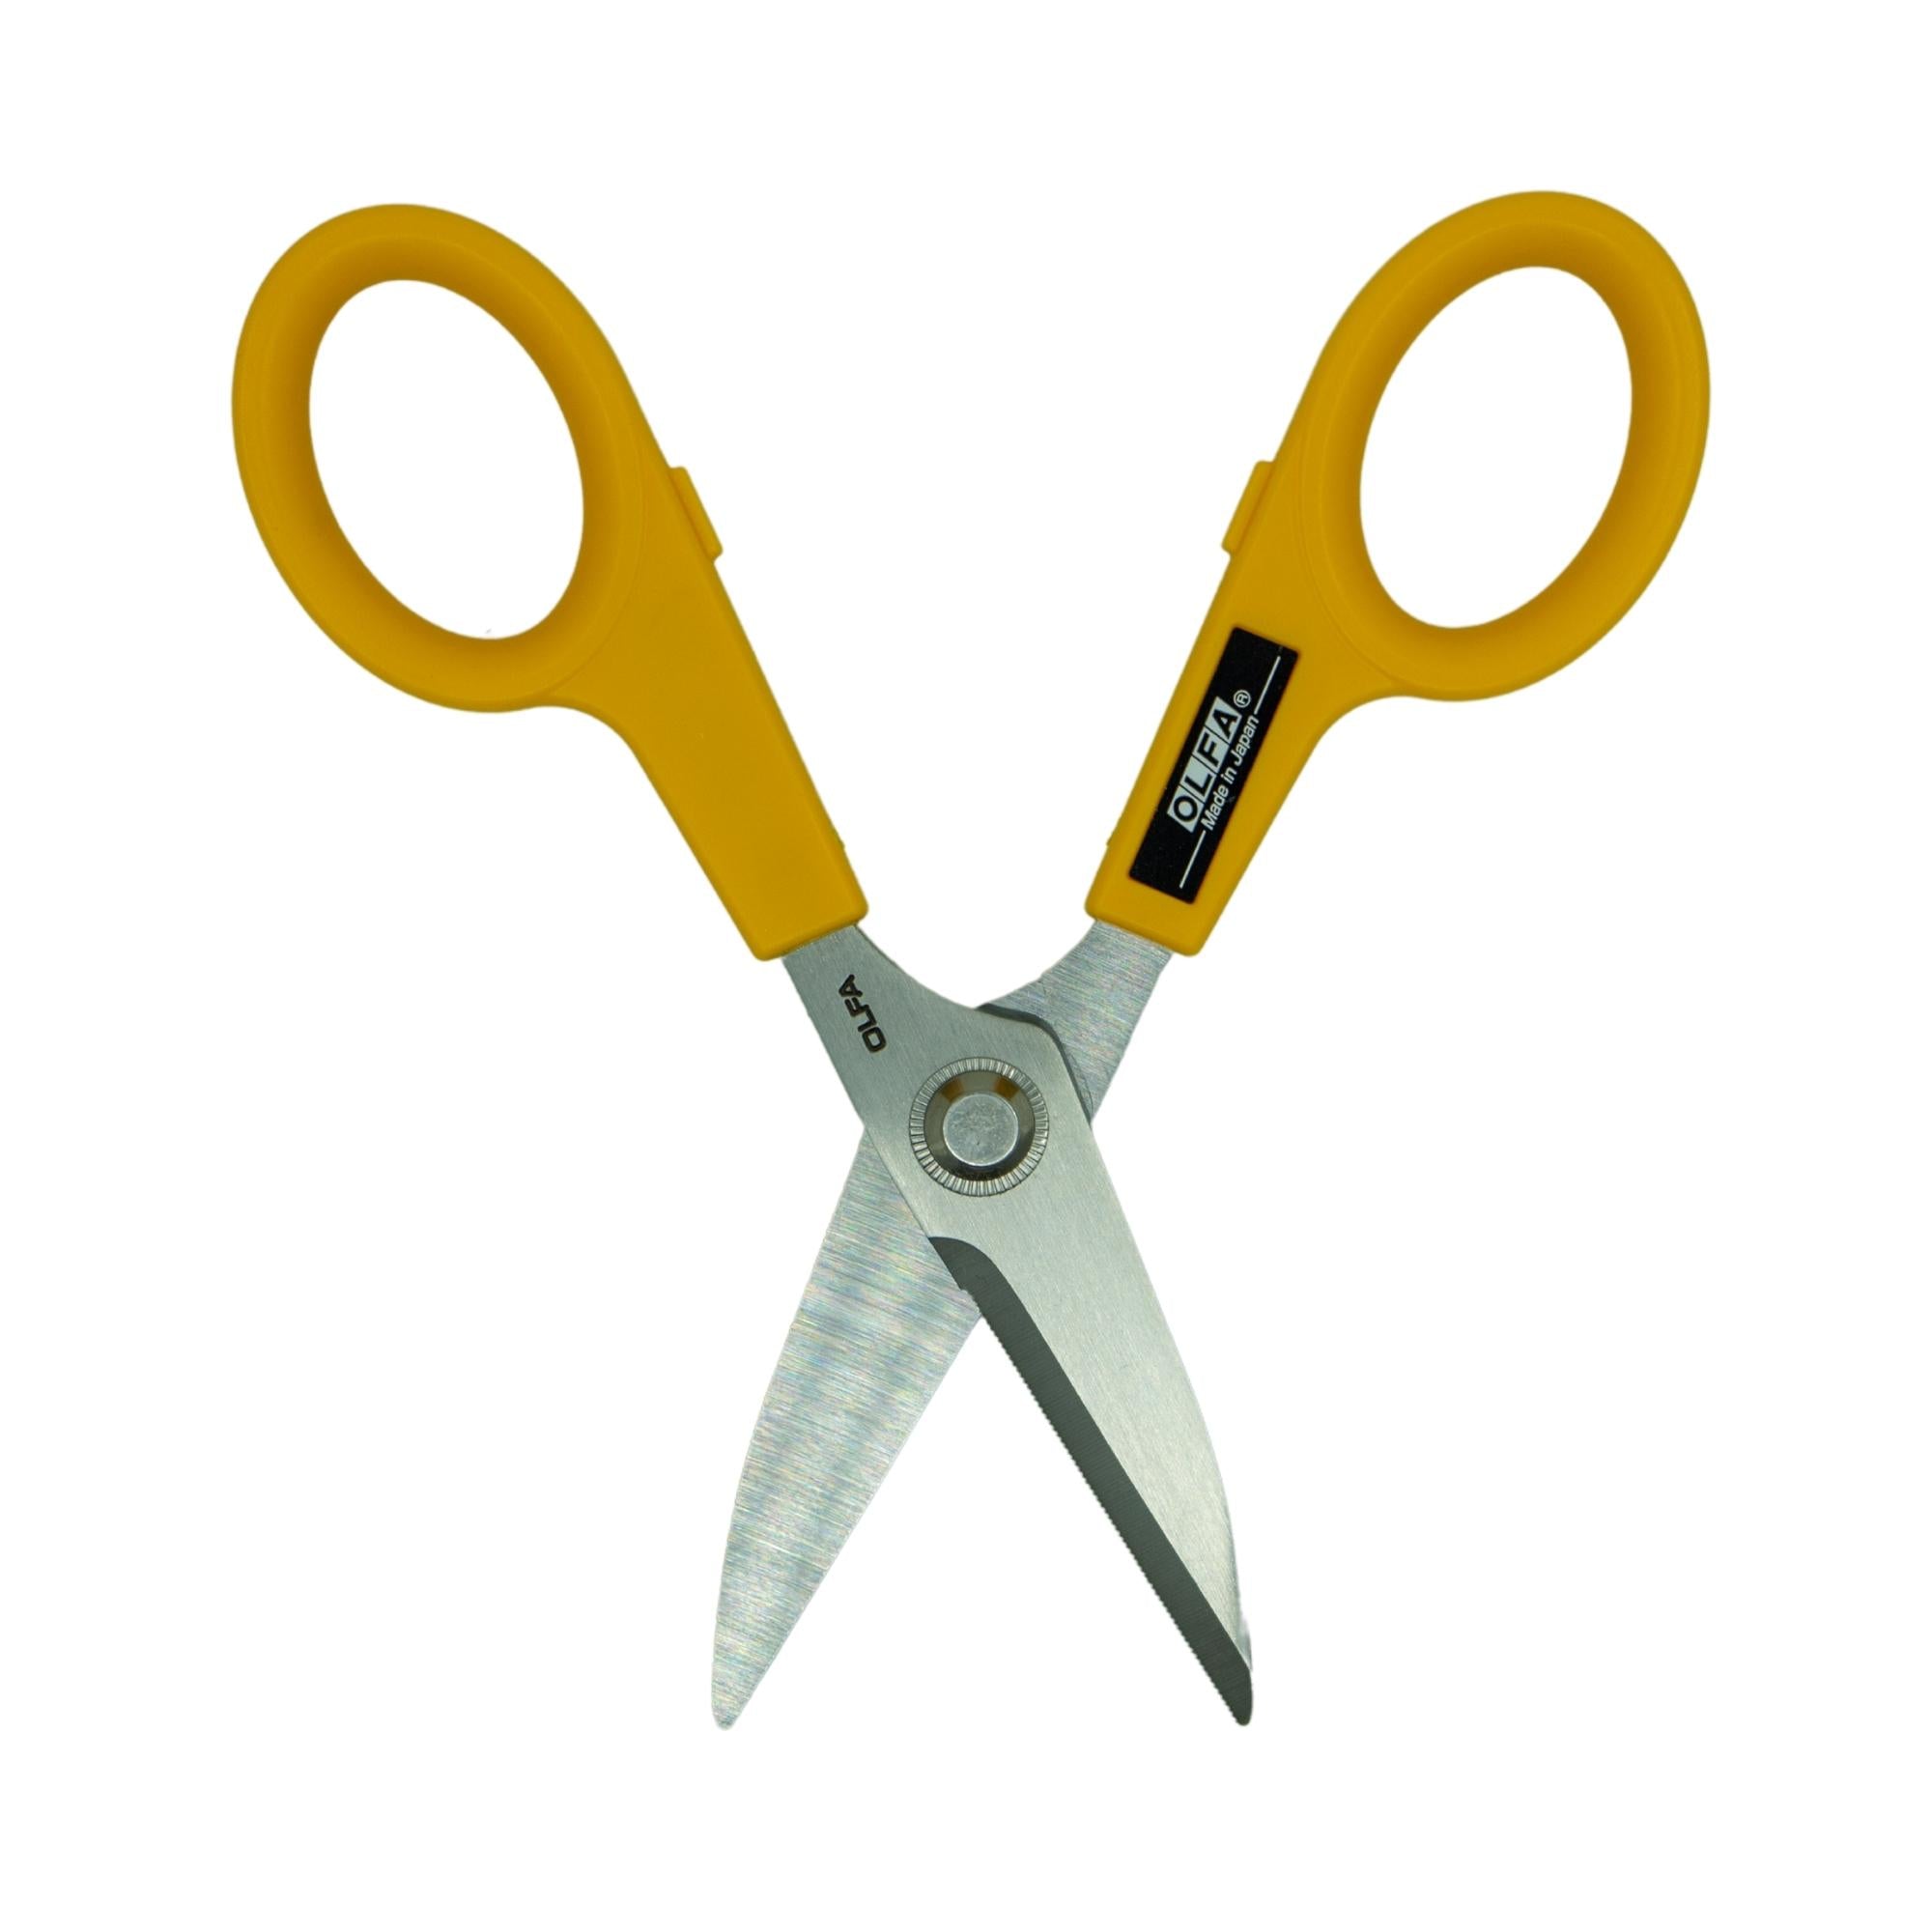 Find A Wholesale industrial electric scissors cutting fabric At A Great  Price 